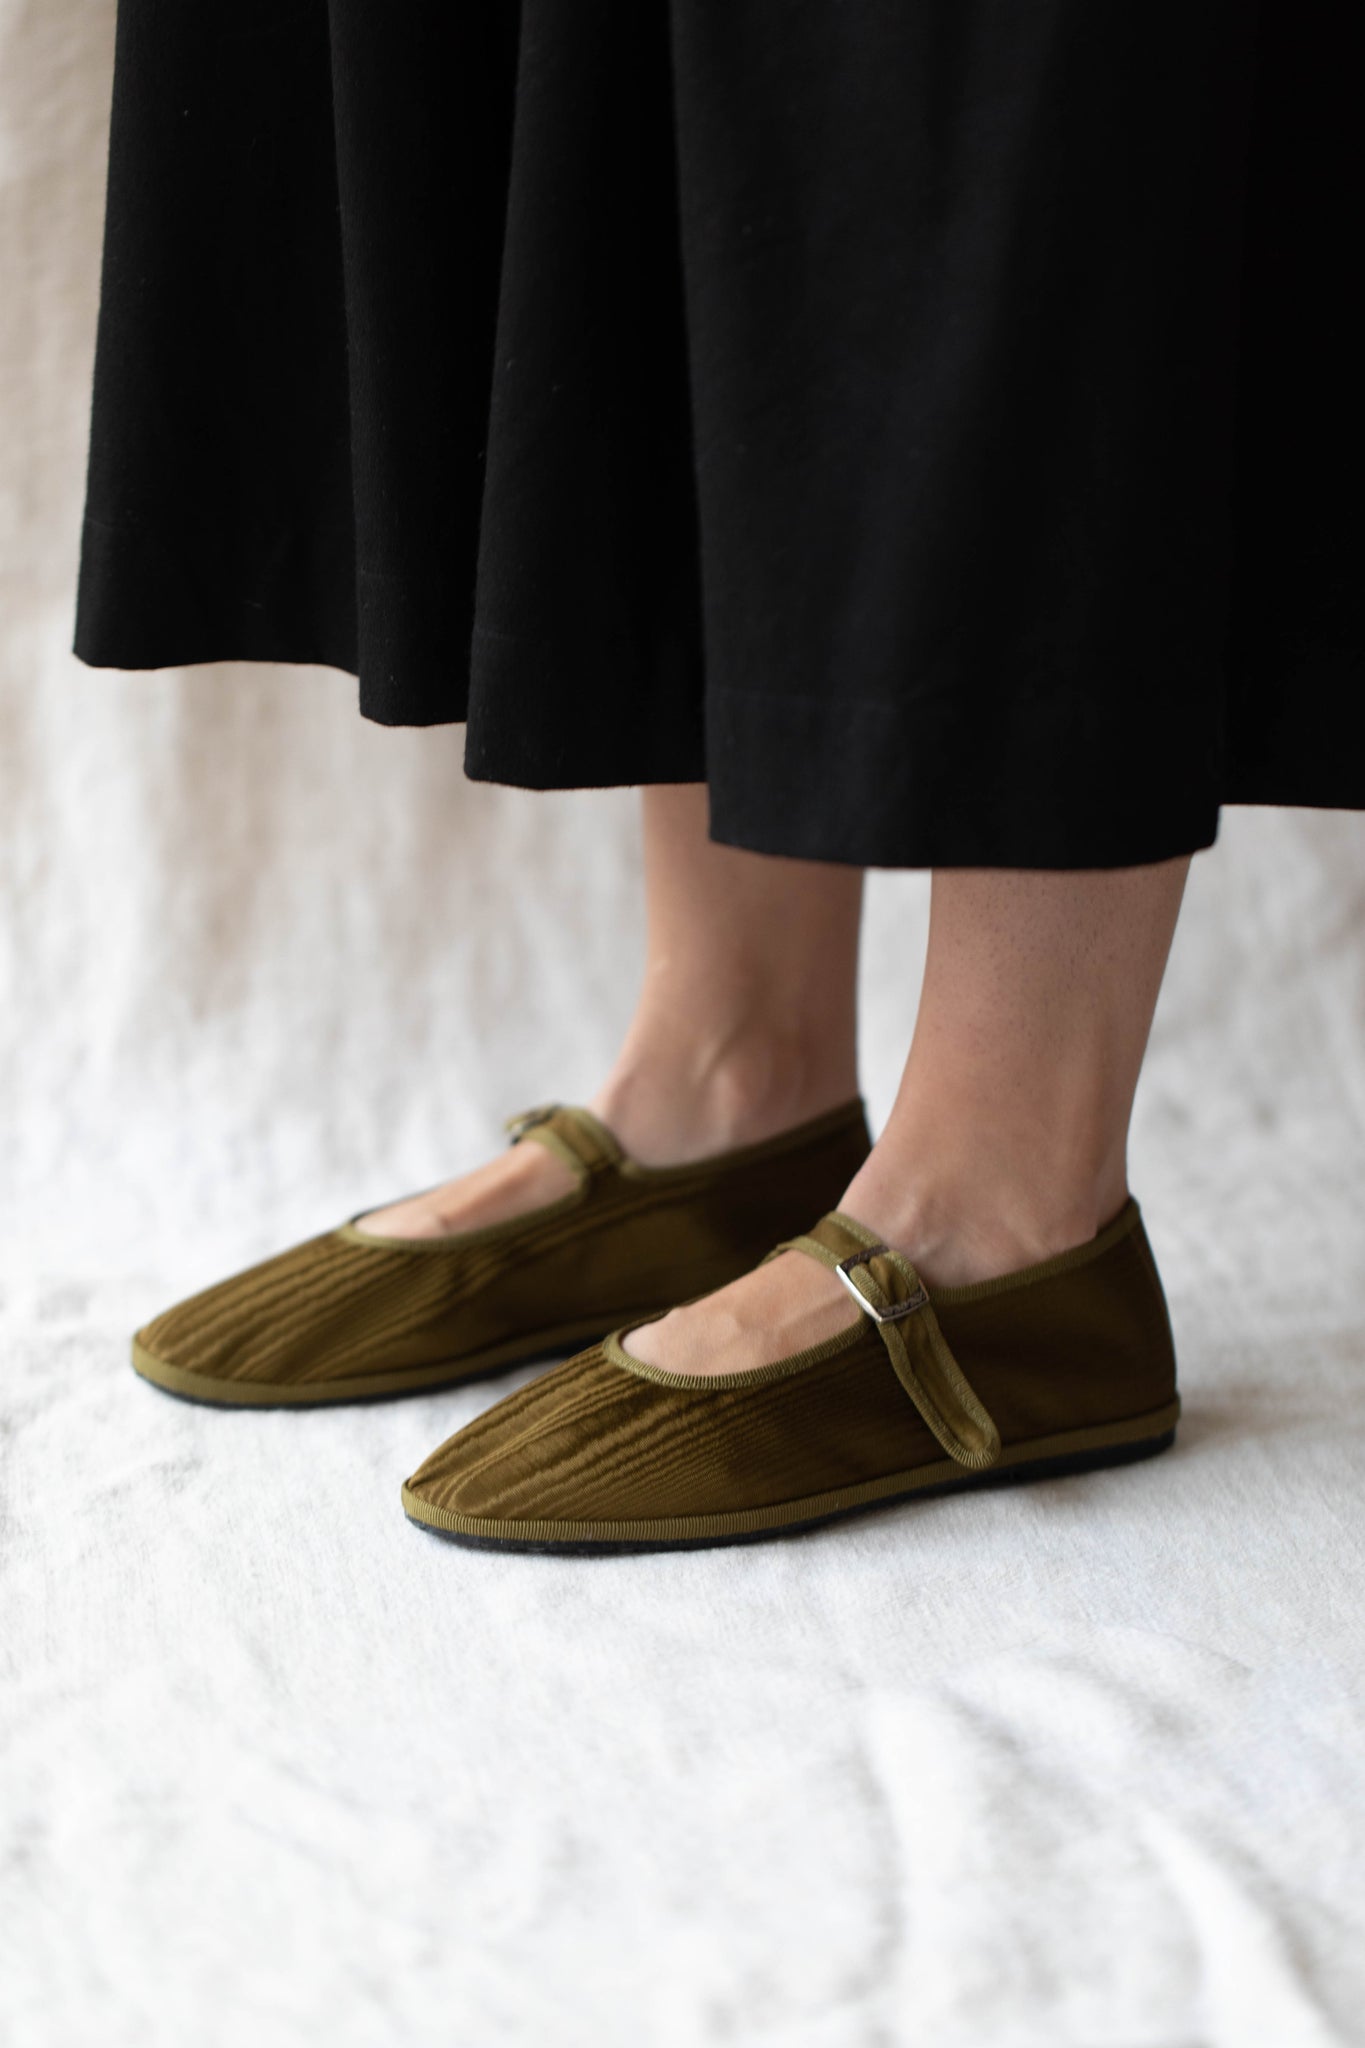 Drogheria Crivellini Silk Mary Janes in Olive